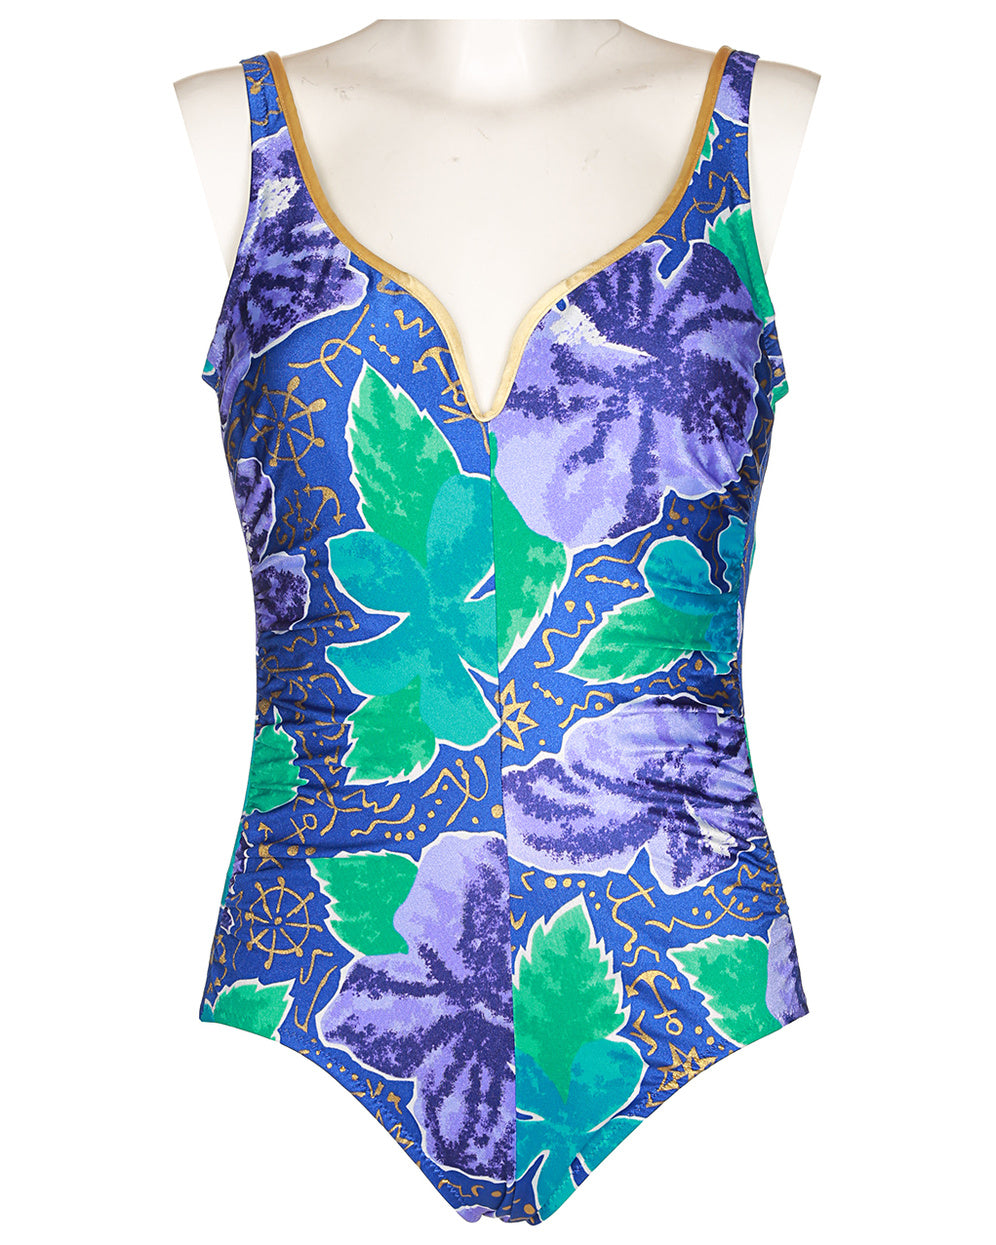 80s Patterned One Piece Swimsuit - L